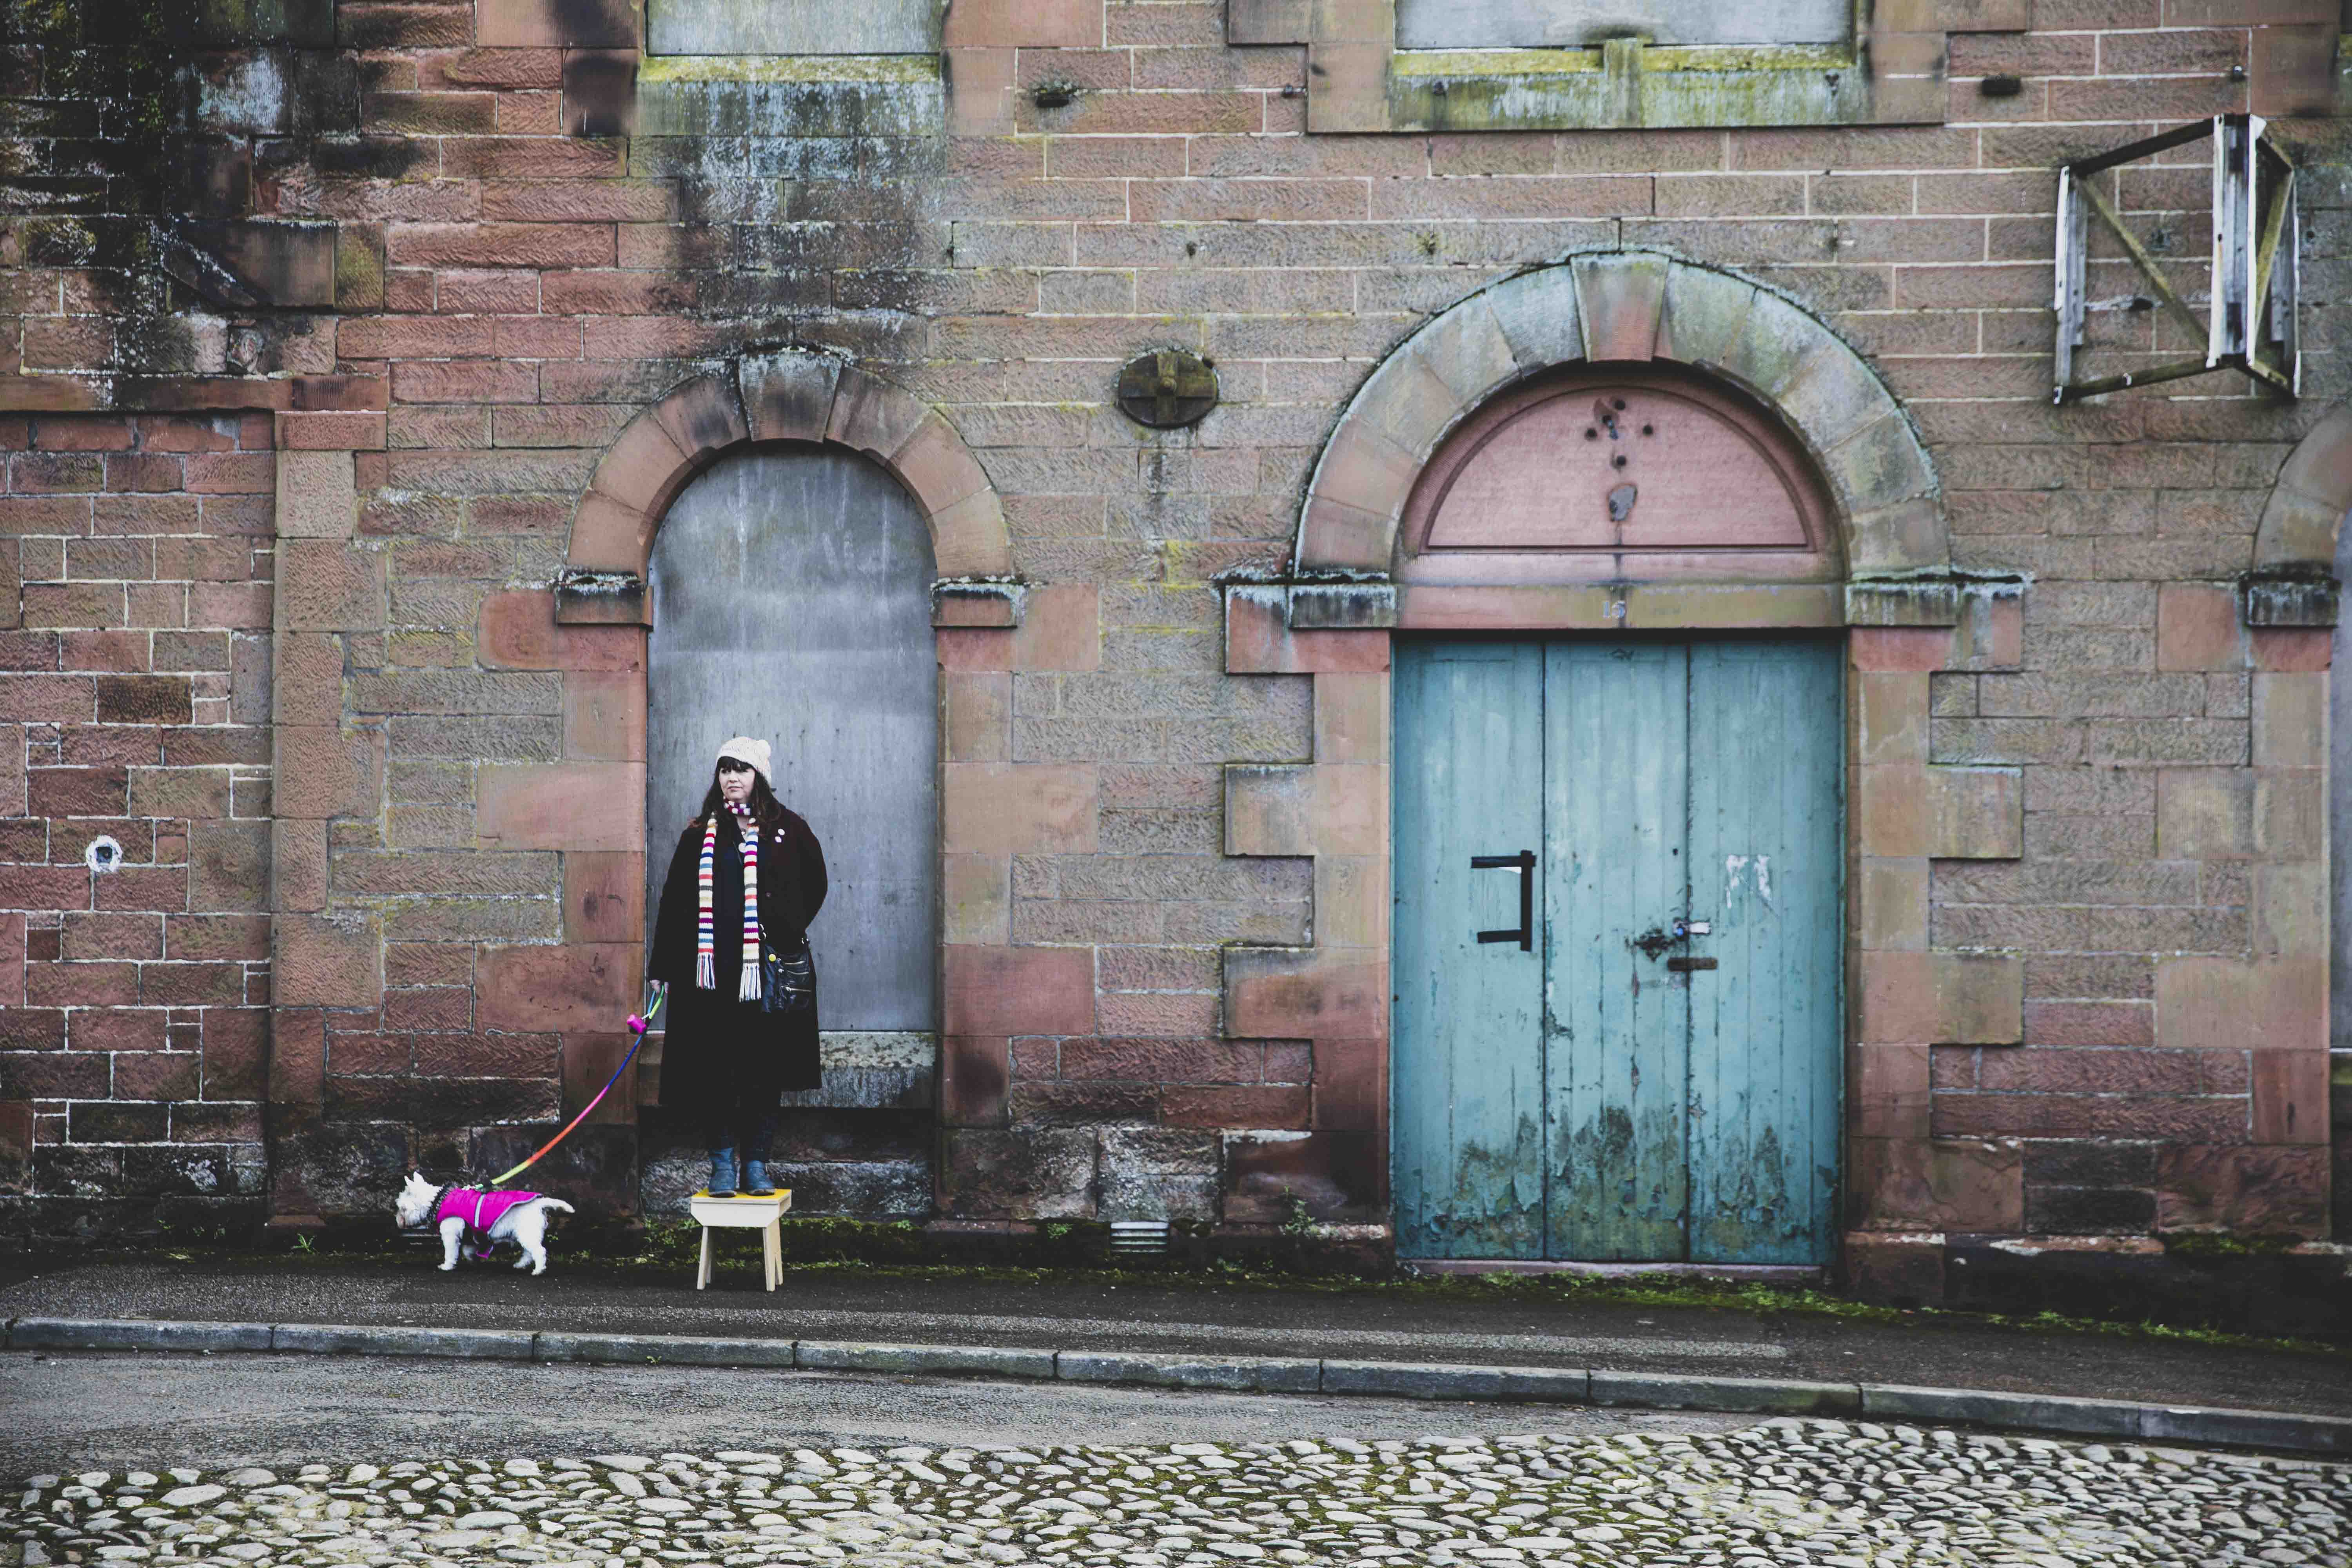 In front of a stained stone wall with blocked up windows and a rotten blue door stands a woman perched on a wooden stool. A small white dog in a bright pink coat is on the street next to her.